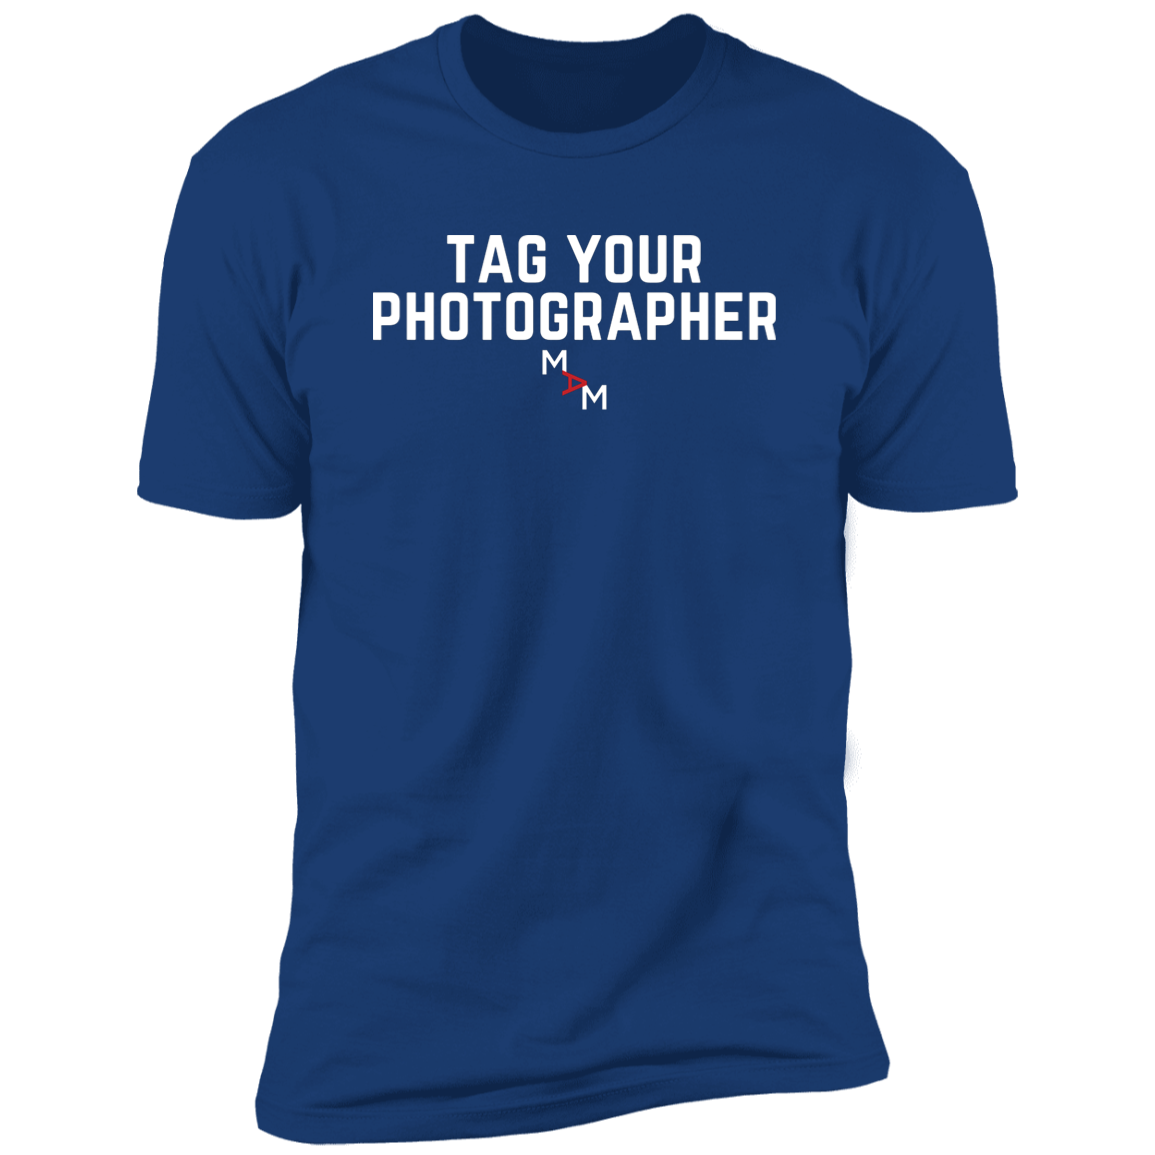 Tag Your Photographer Tee